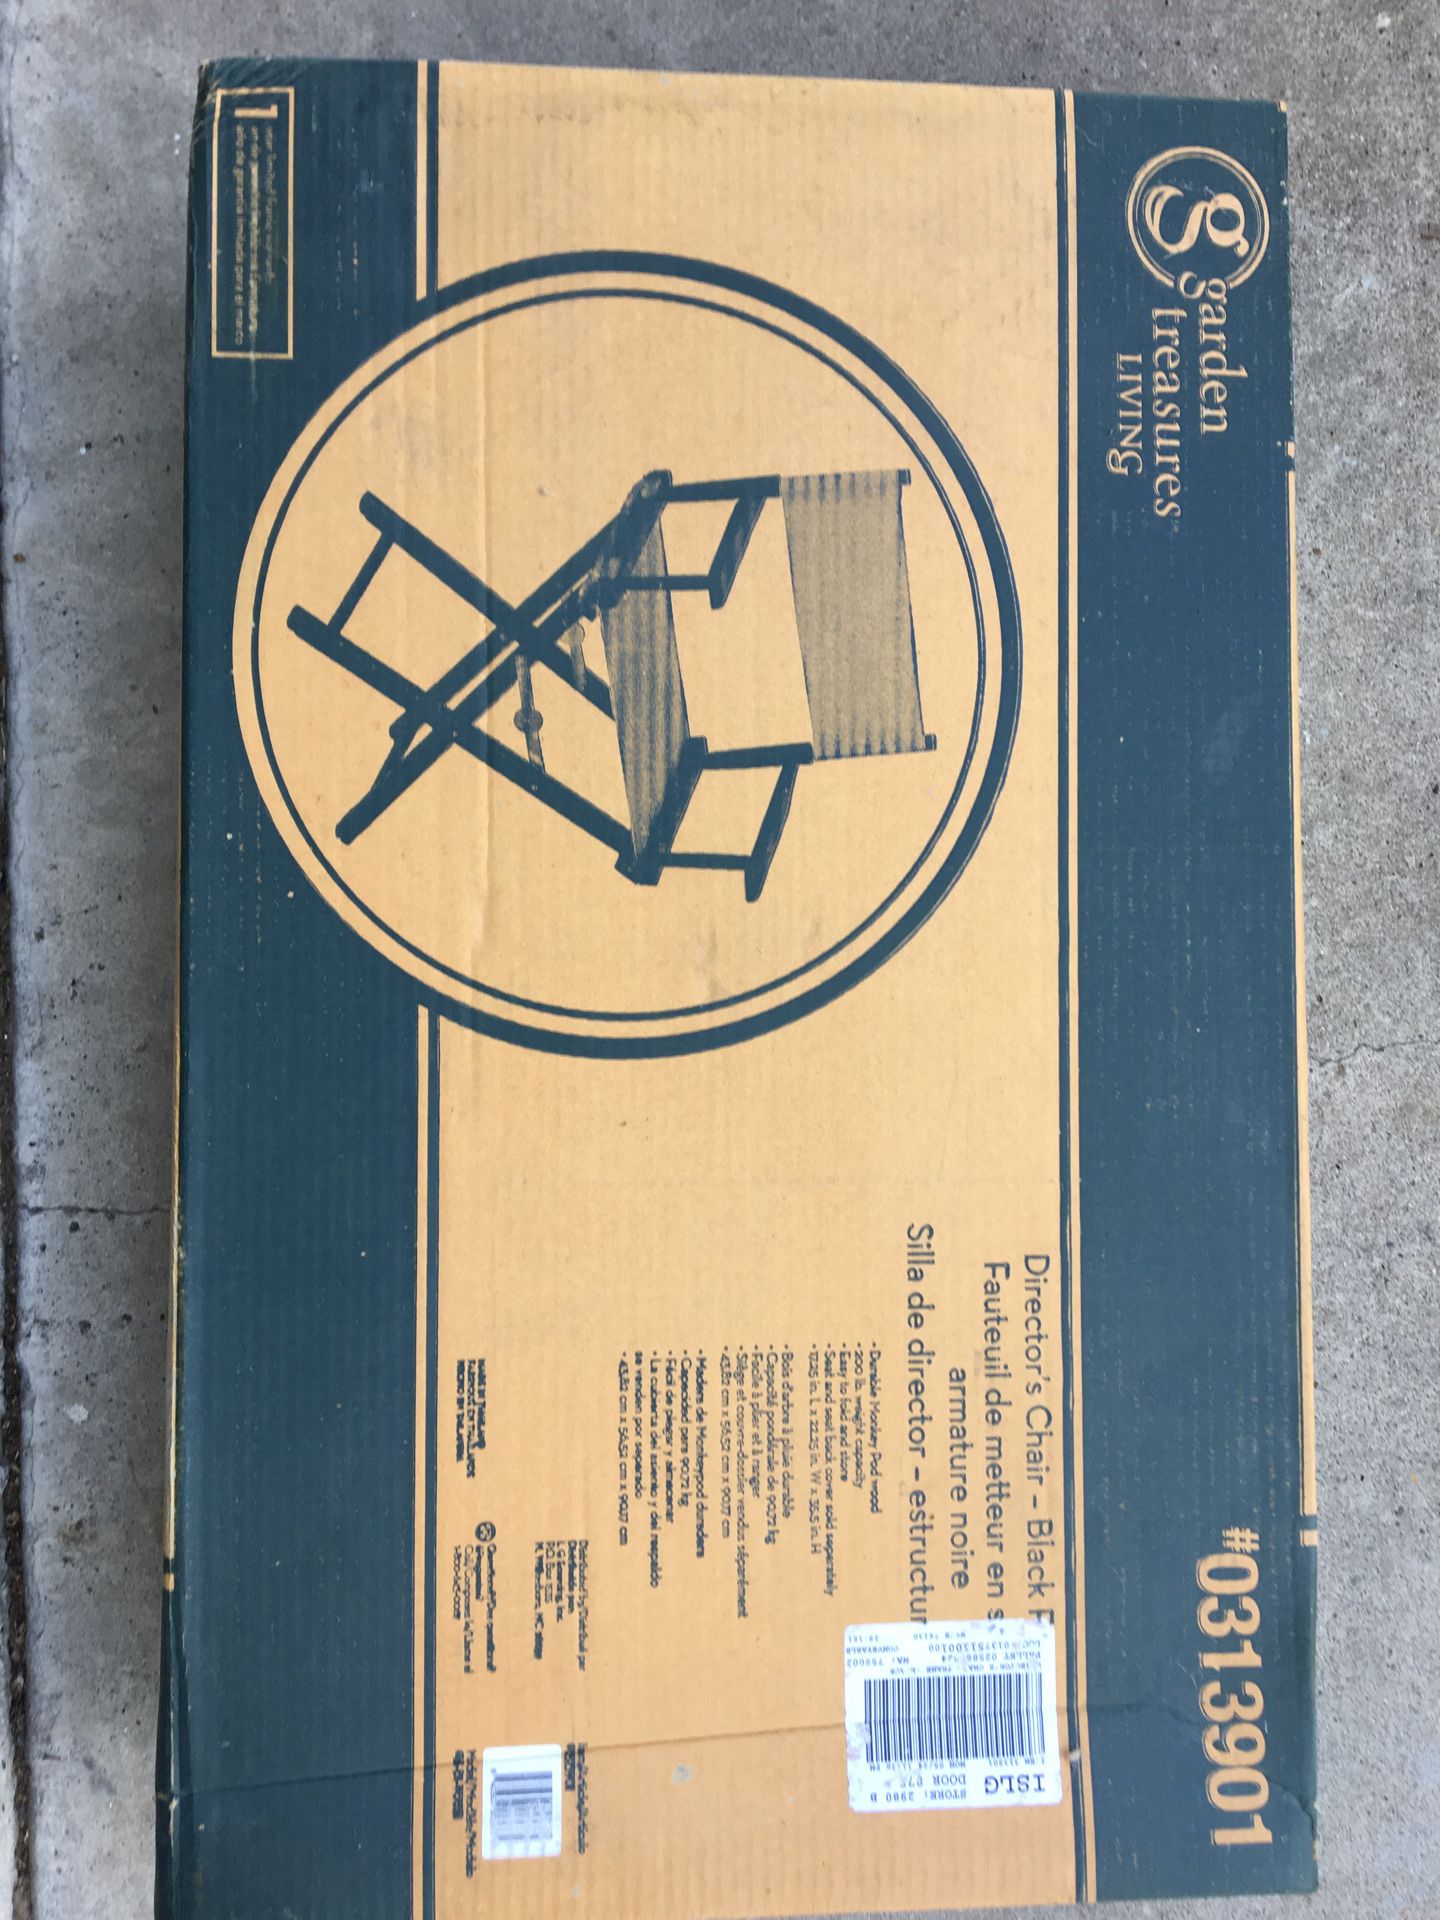 New Director’s Chairs (6) $30.00 each